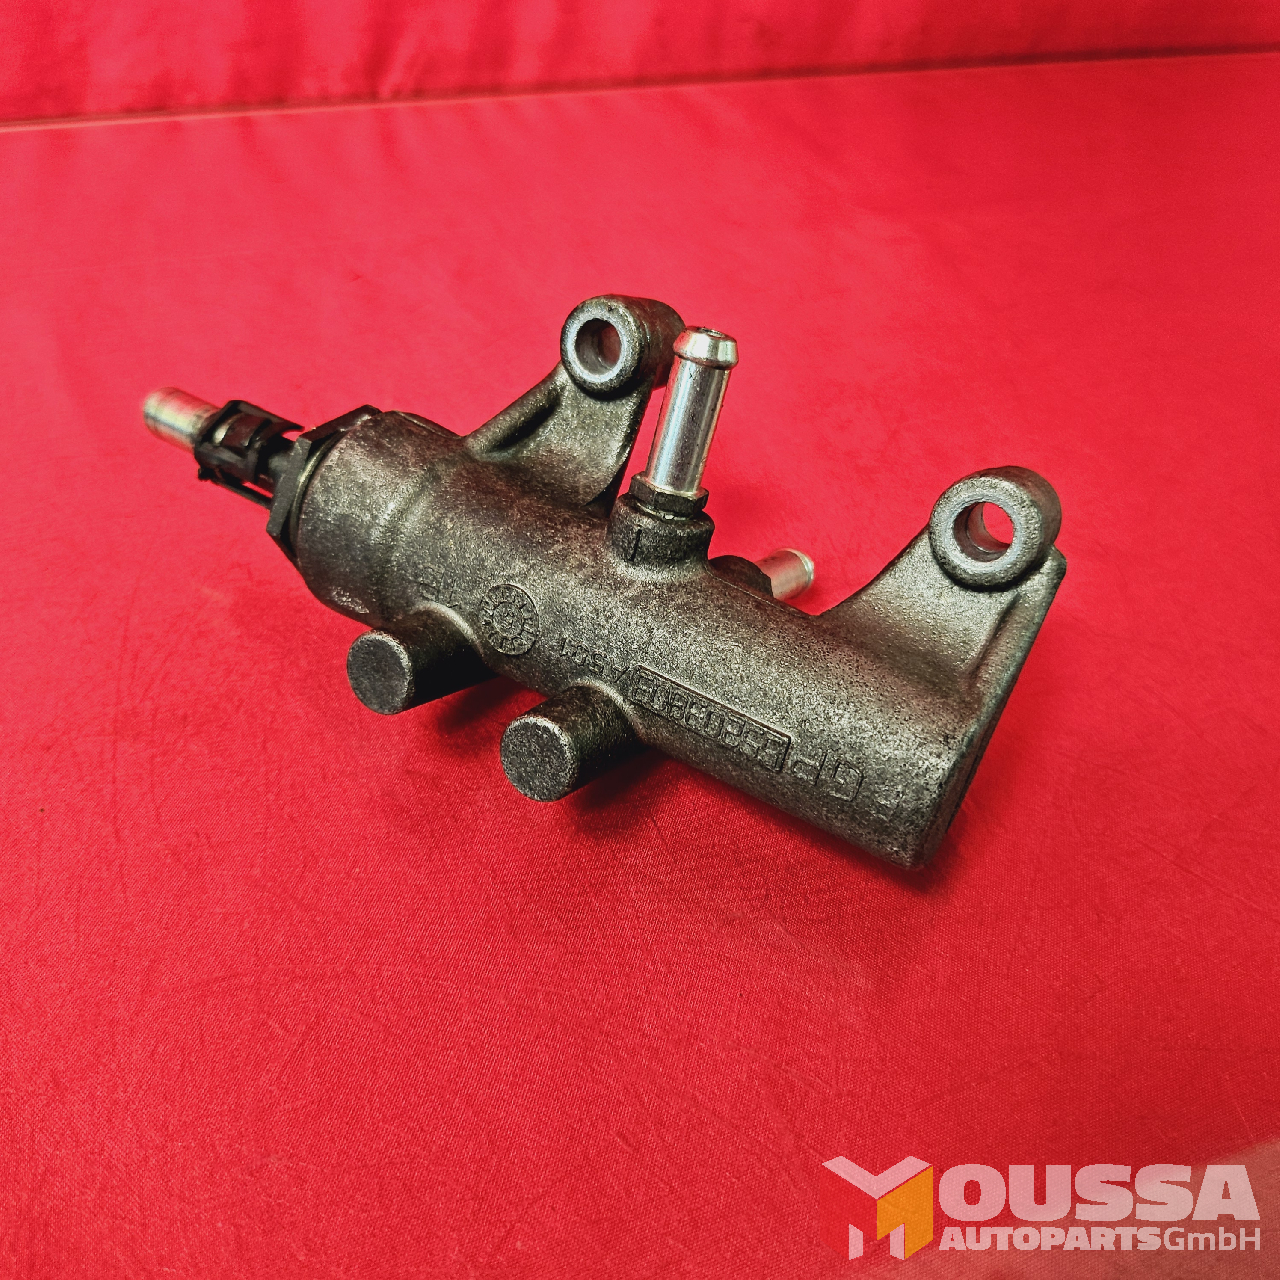 MOUSSA-AUTOPARTS-667c83bfee33a.jpg